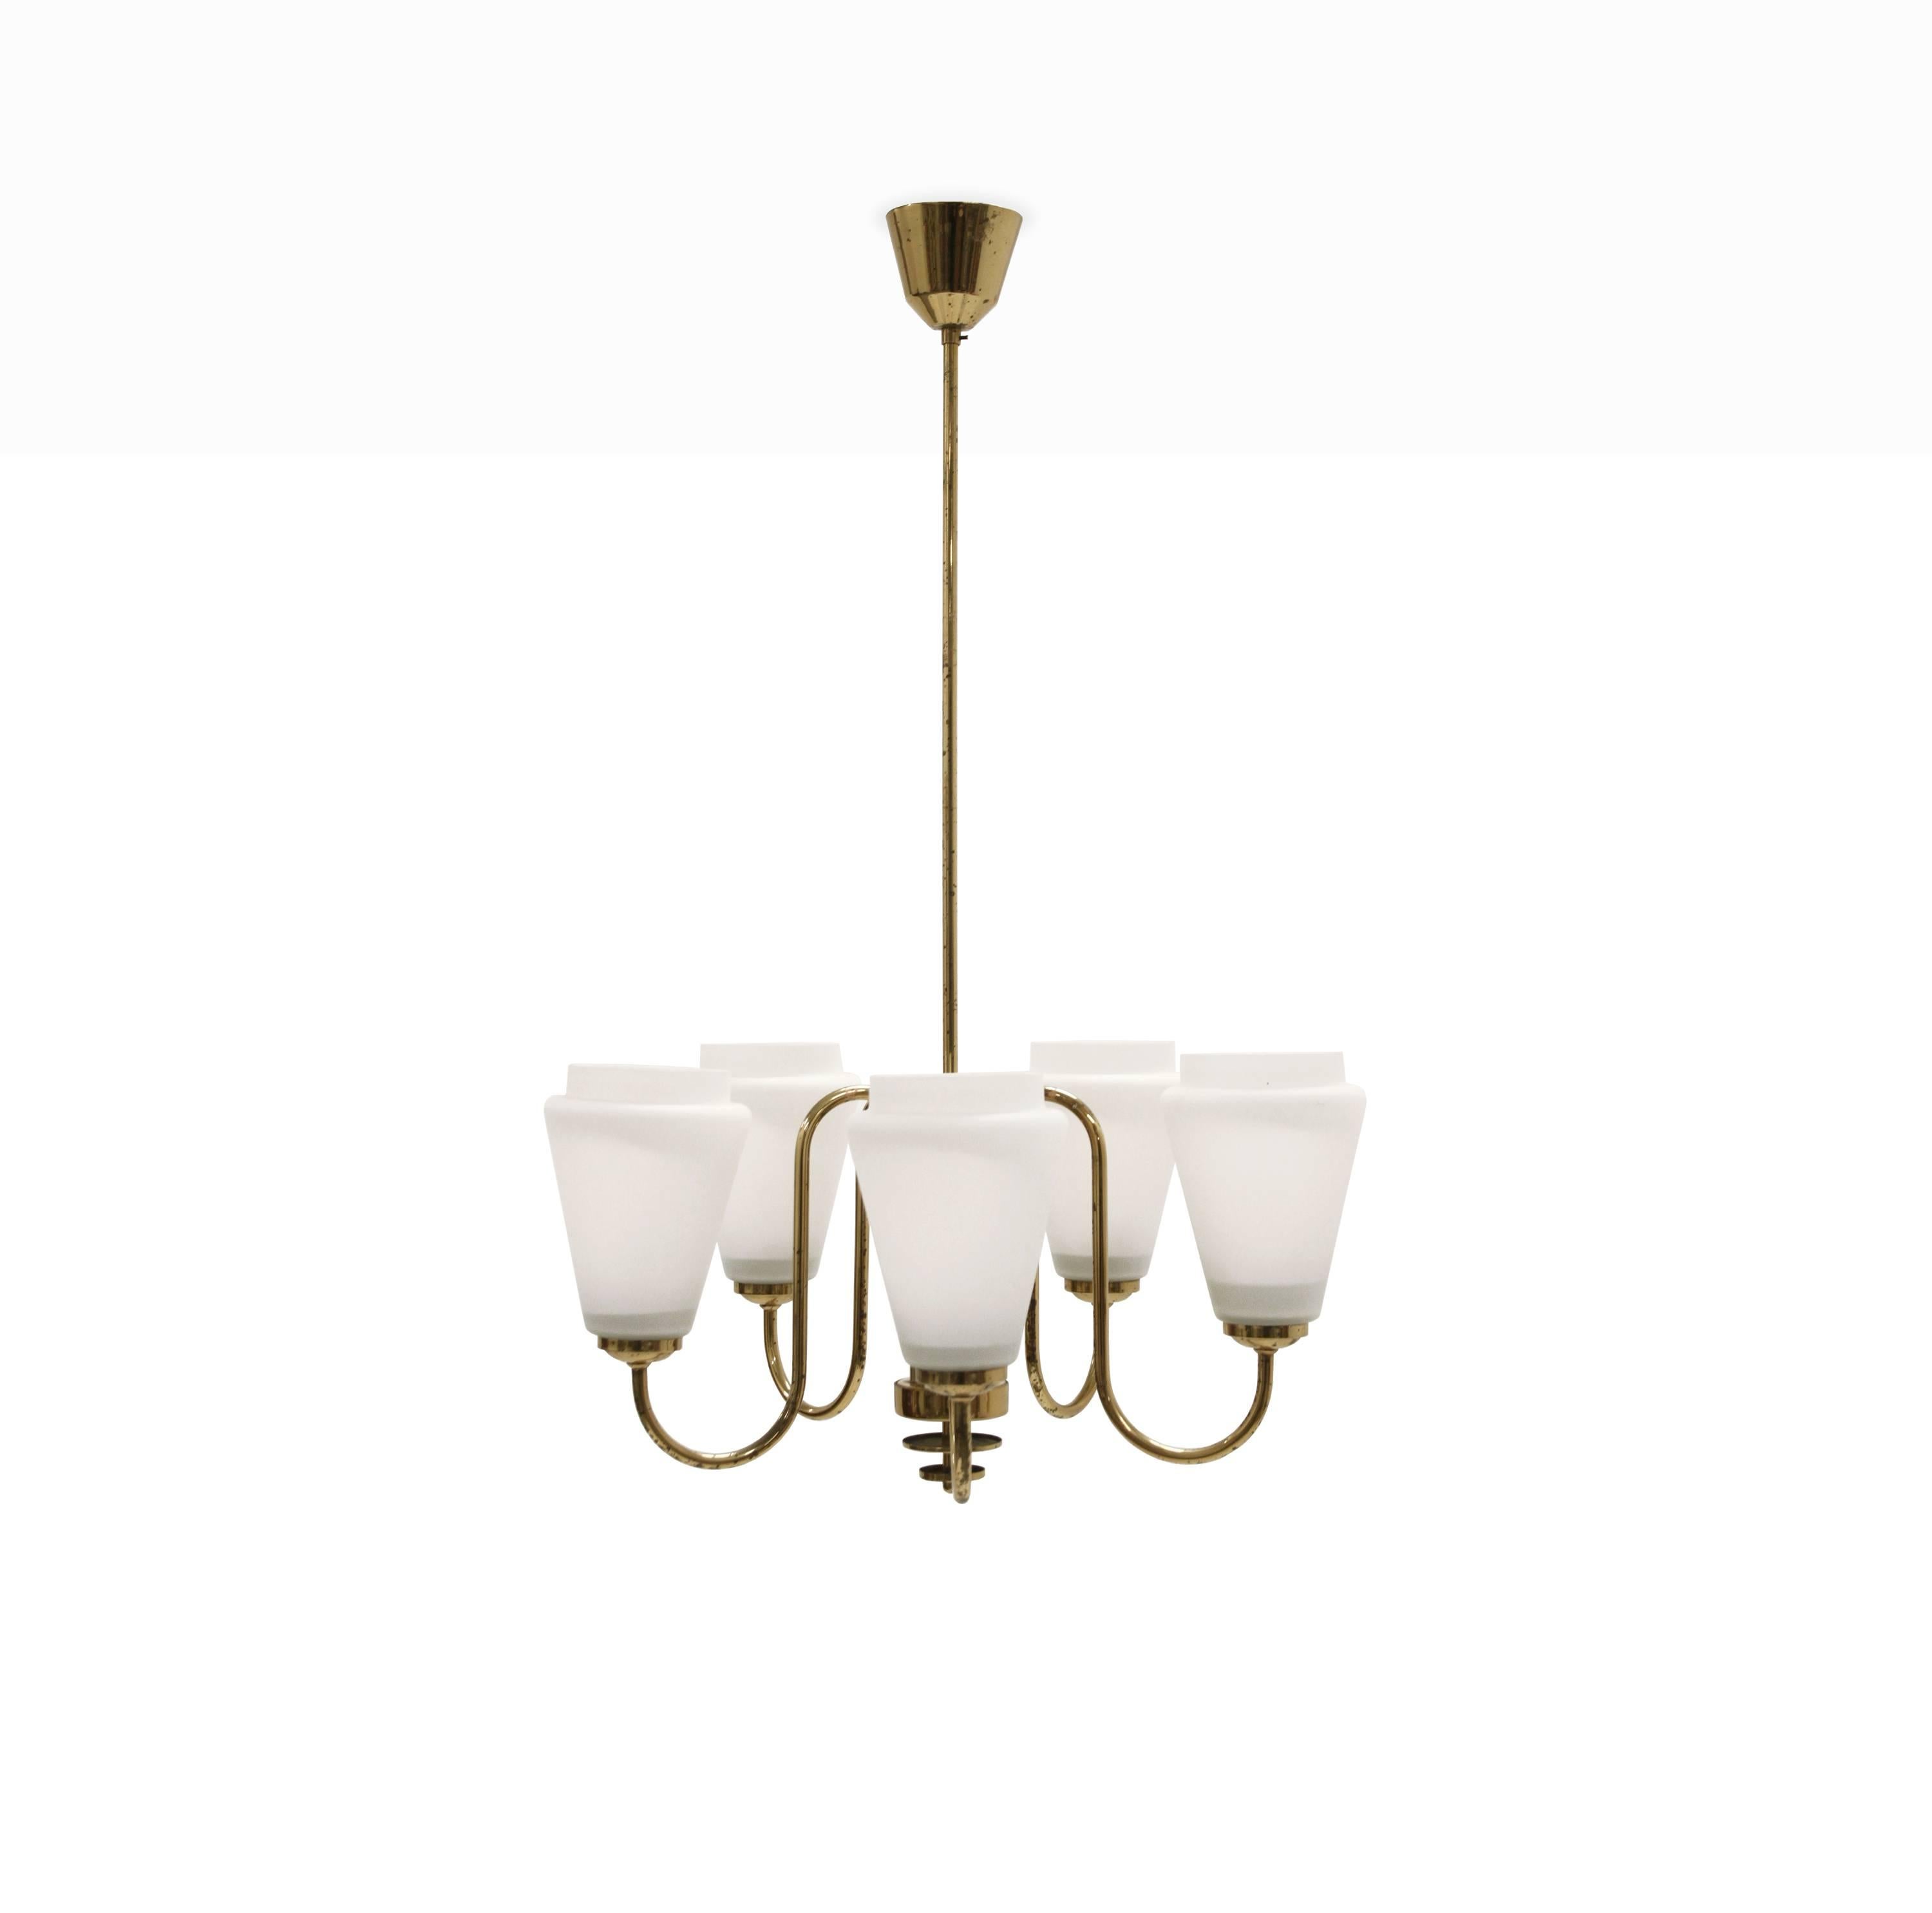 Delightful and appealing five armed chandelier in brass with shades in opaline glass.

Most likely designed and made in Sweden from circa 1960s first half.

The lamp is fully working and in good vintage condition with normal signs of wear and